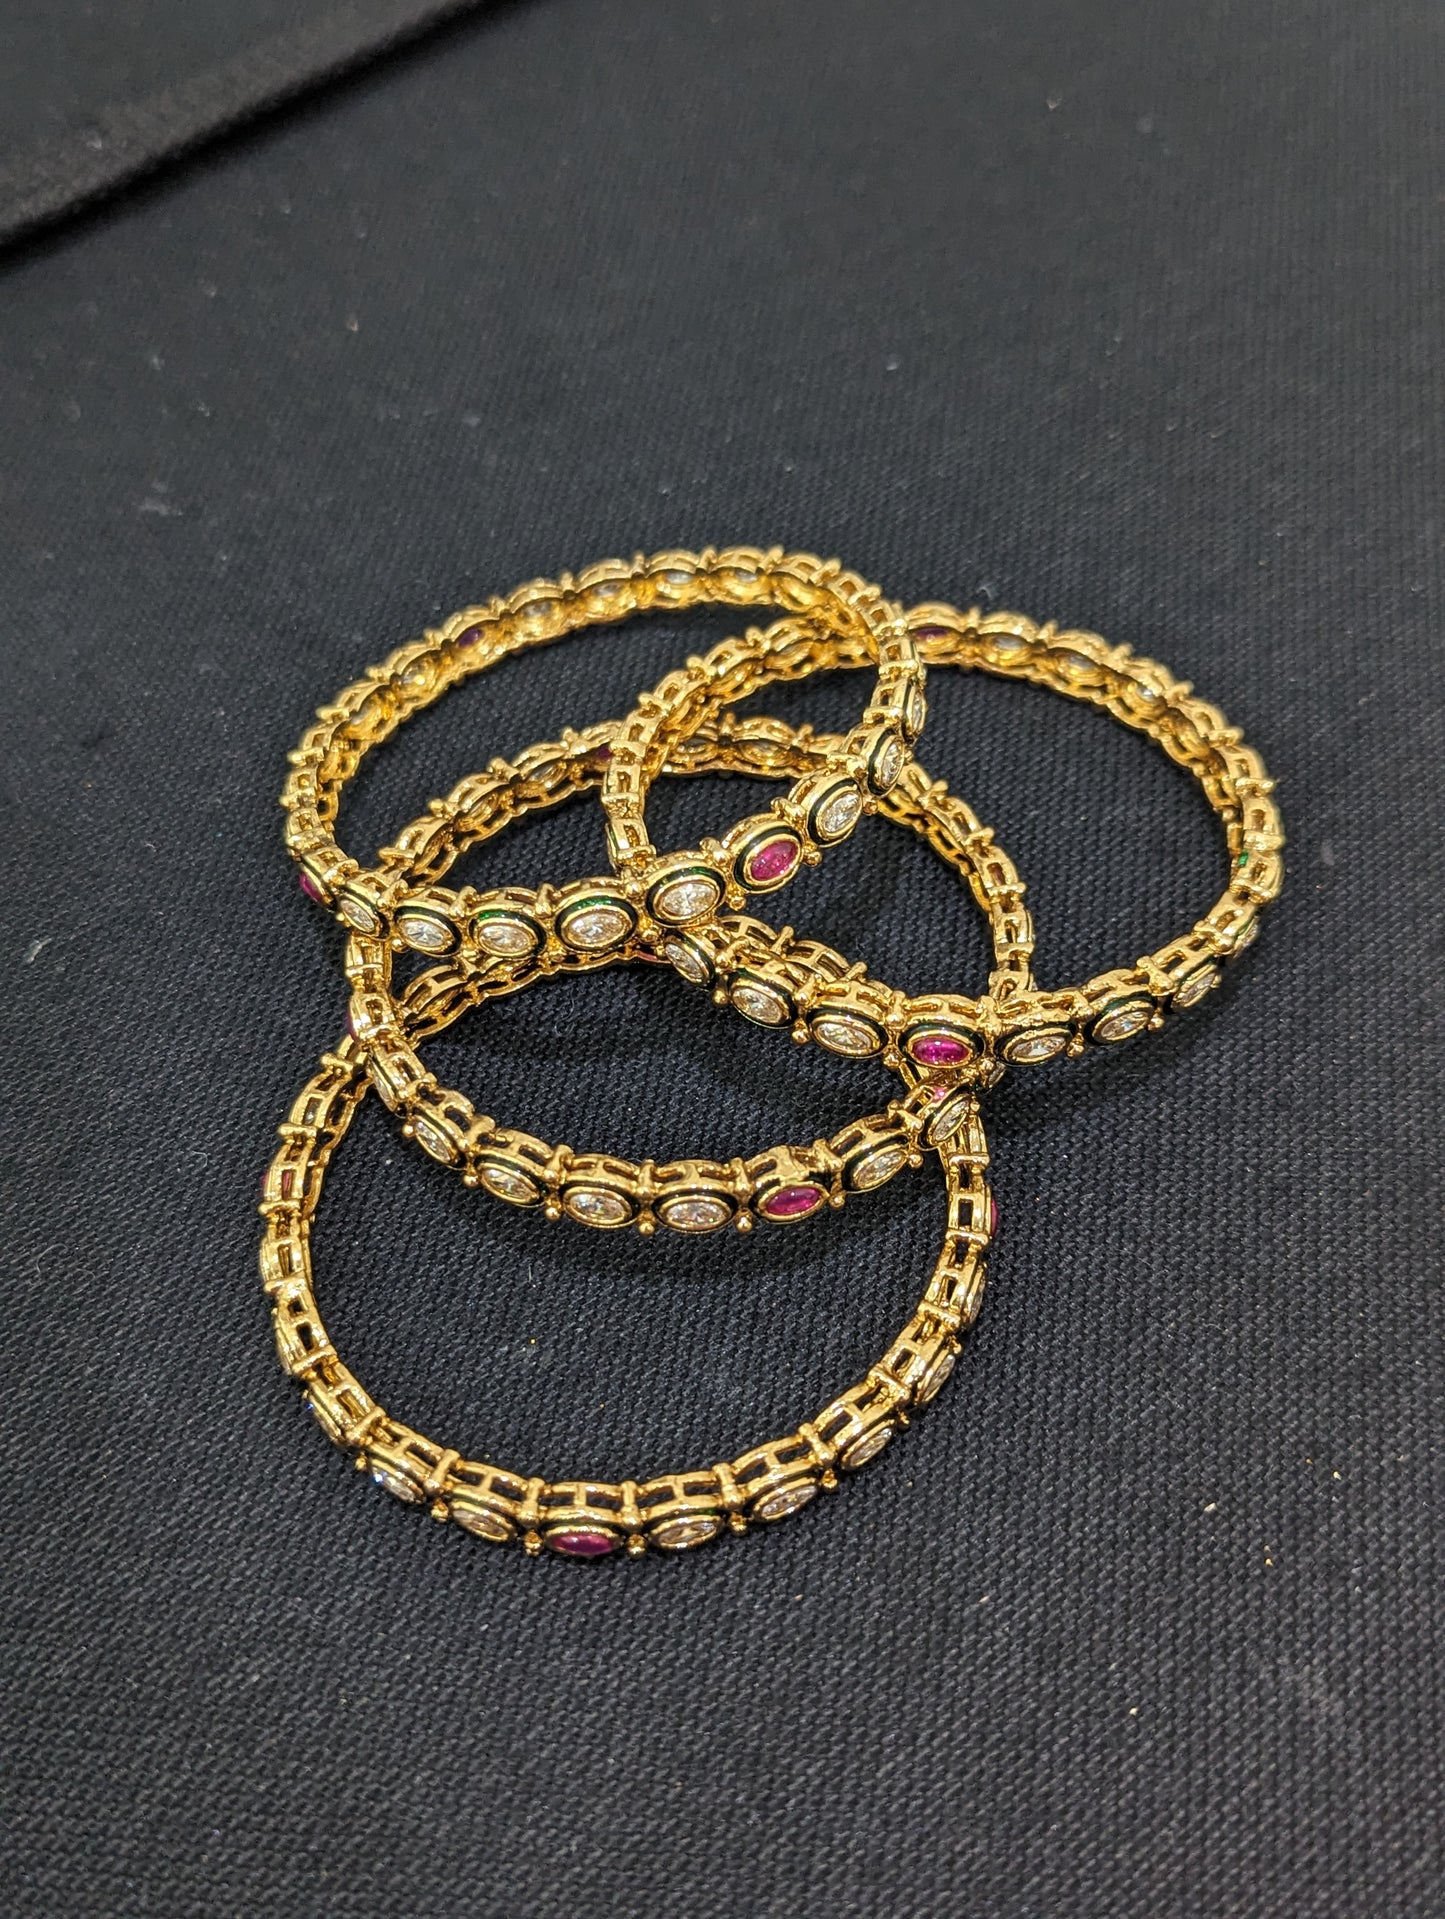 Gold plated Oval Polki stone Bangles - Set of 4